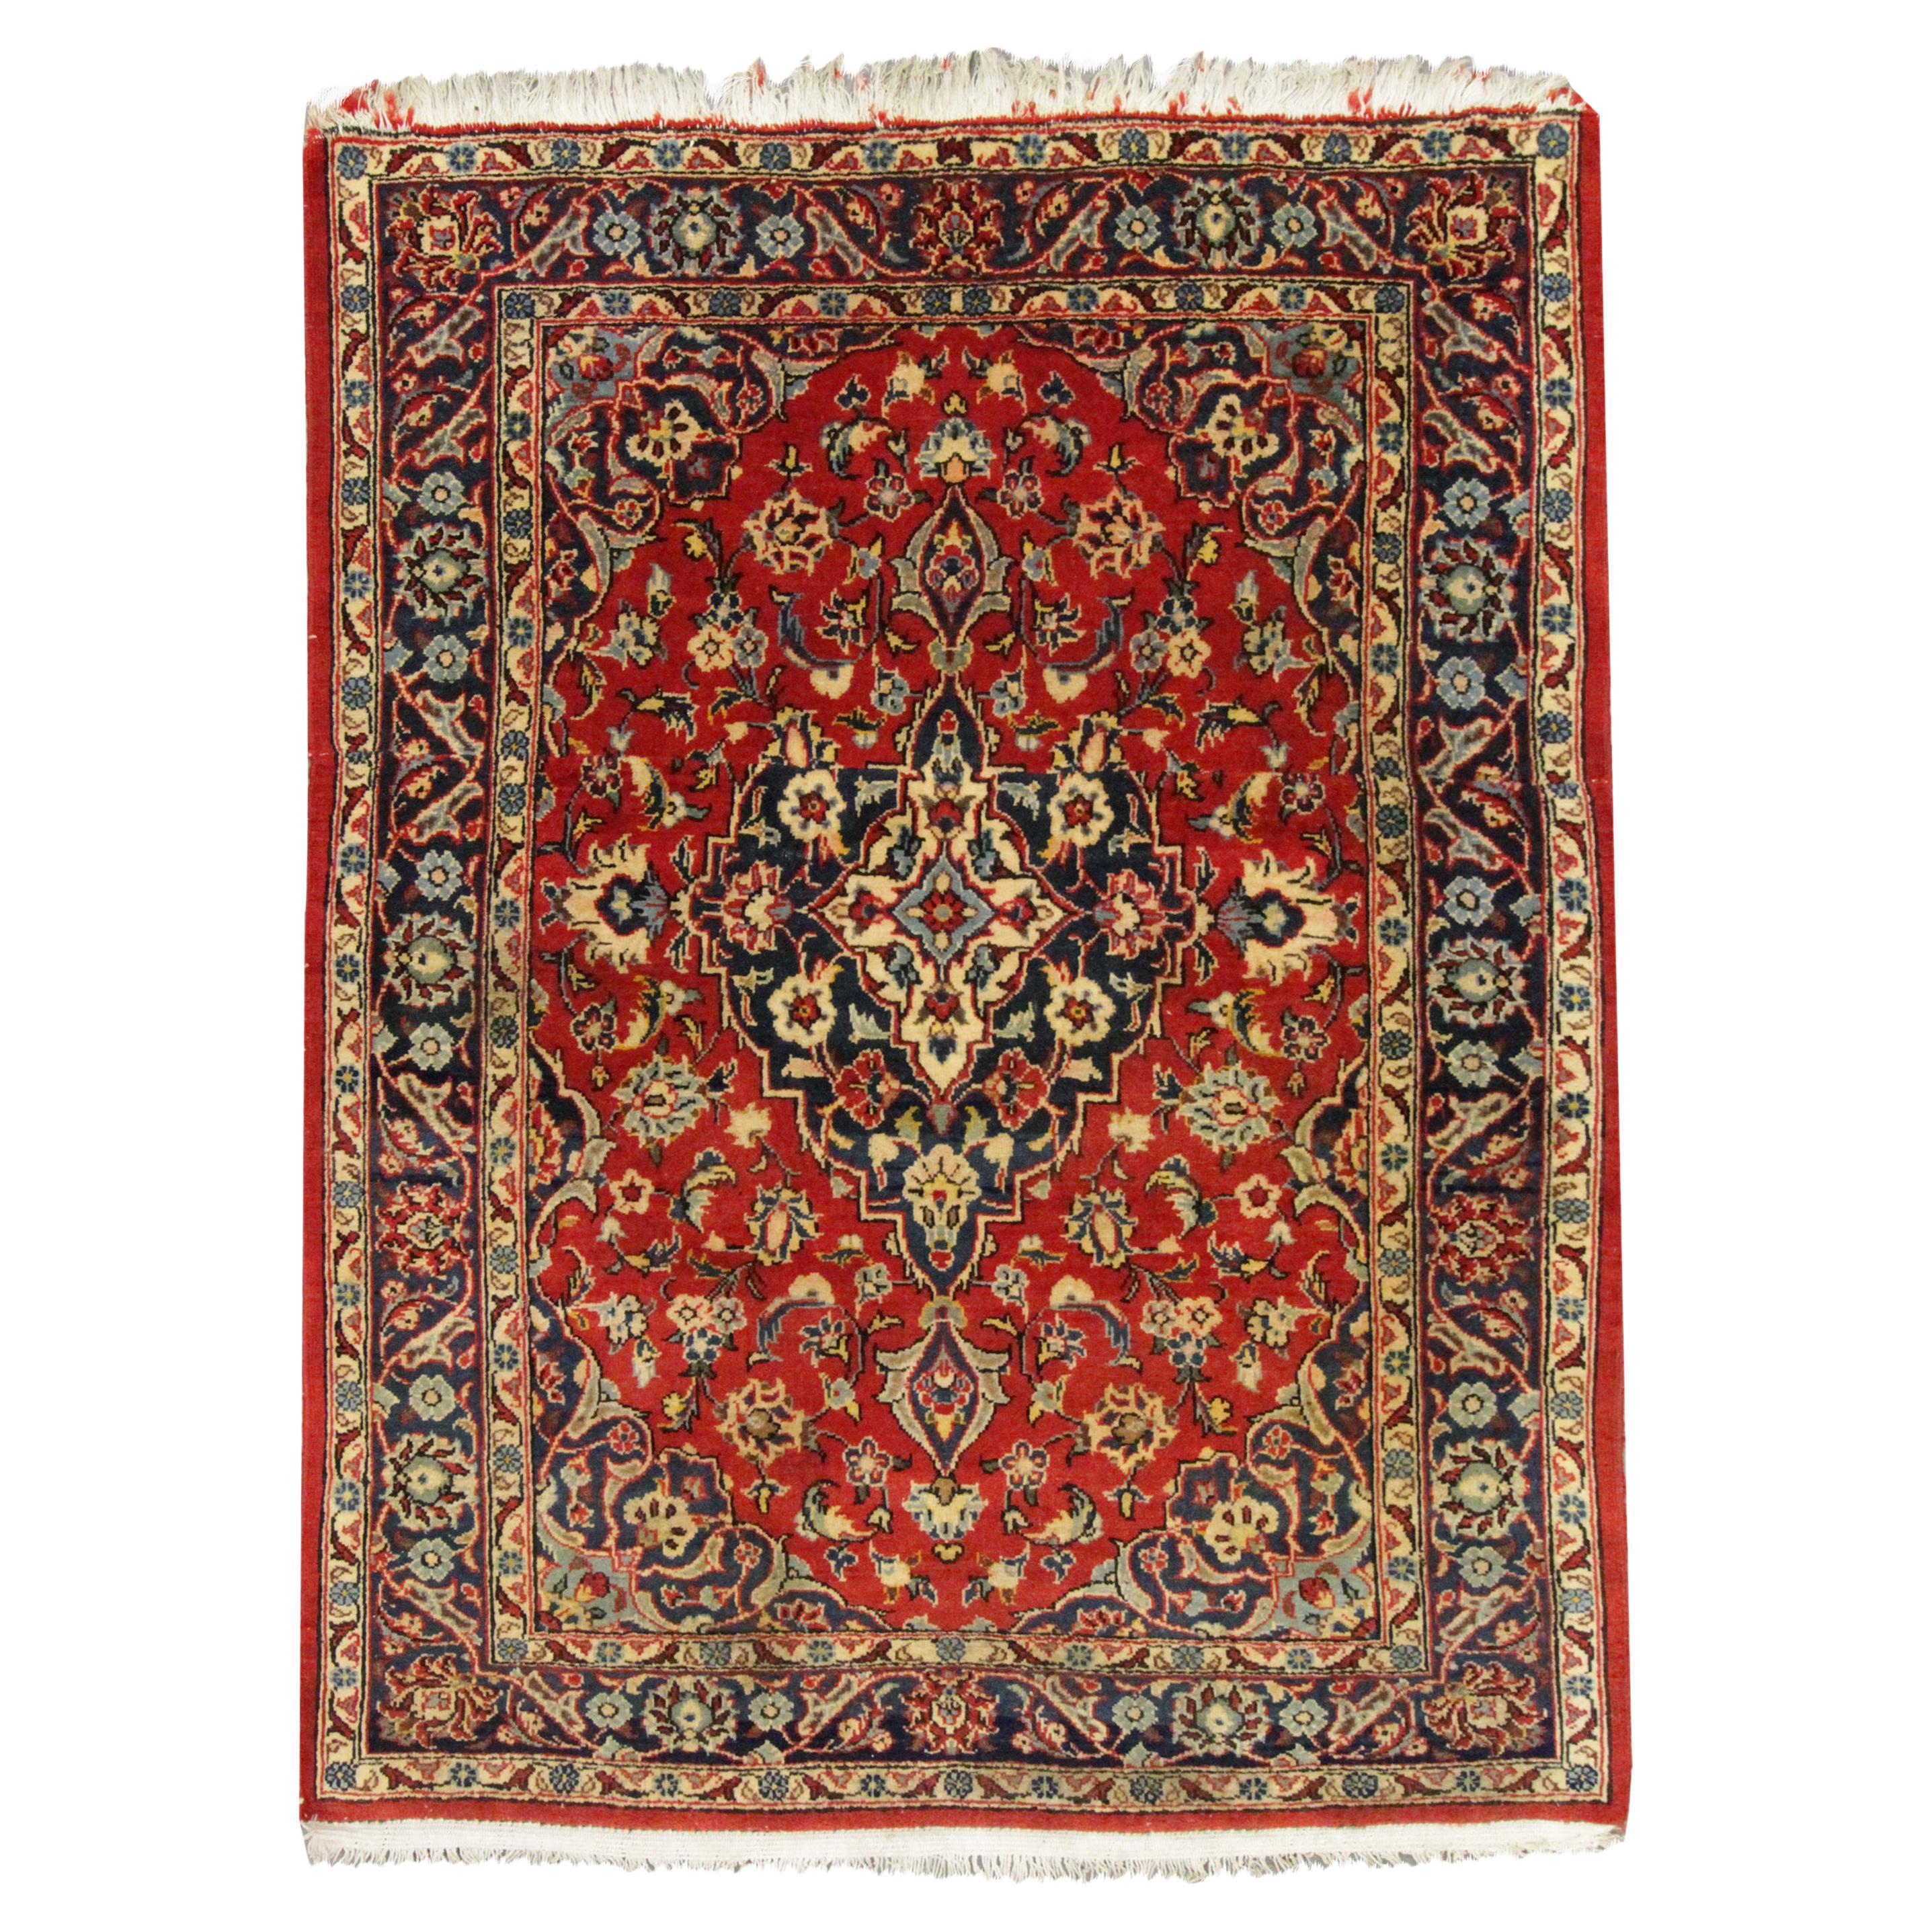 Small Living Area Rug Handwoven Red Oriental Wool Carpet Traditional